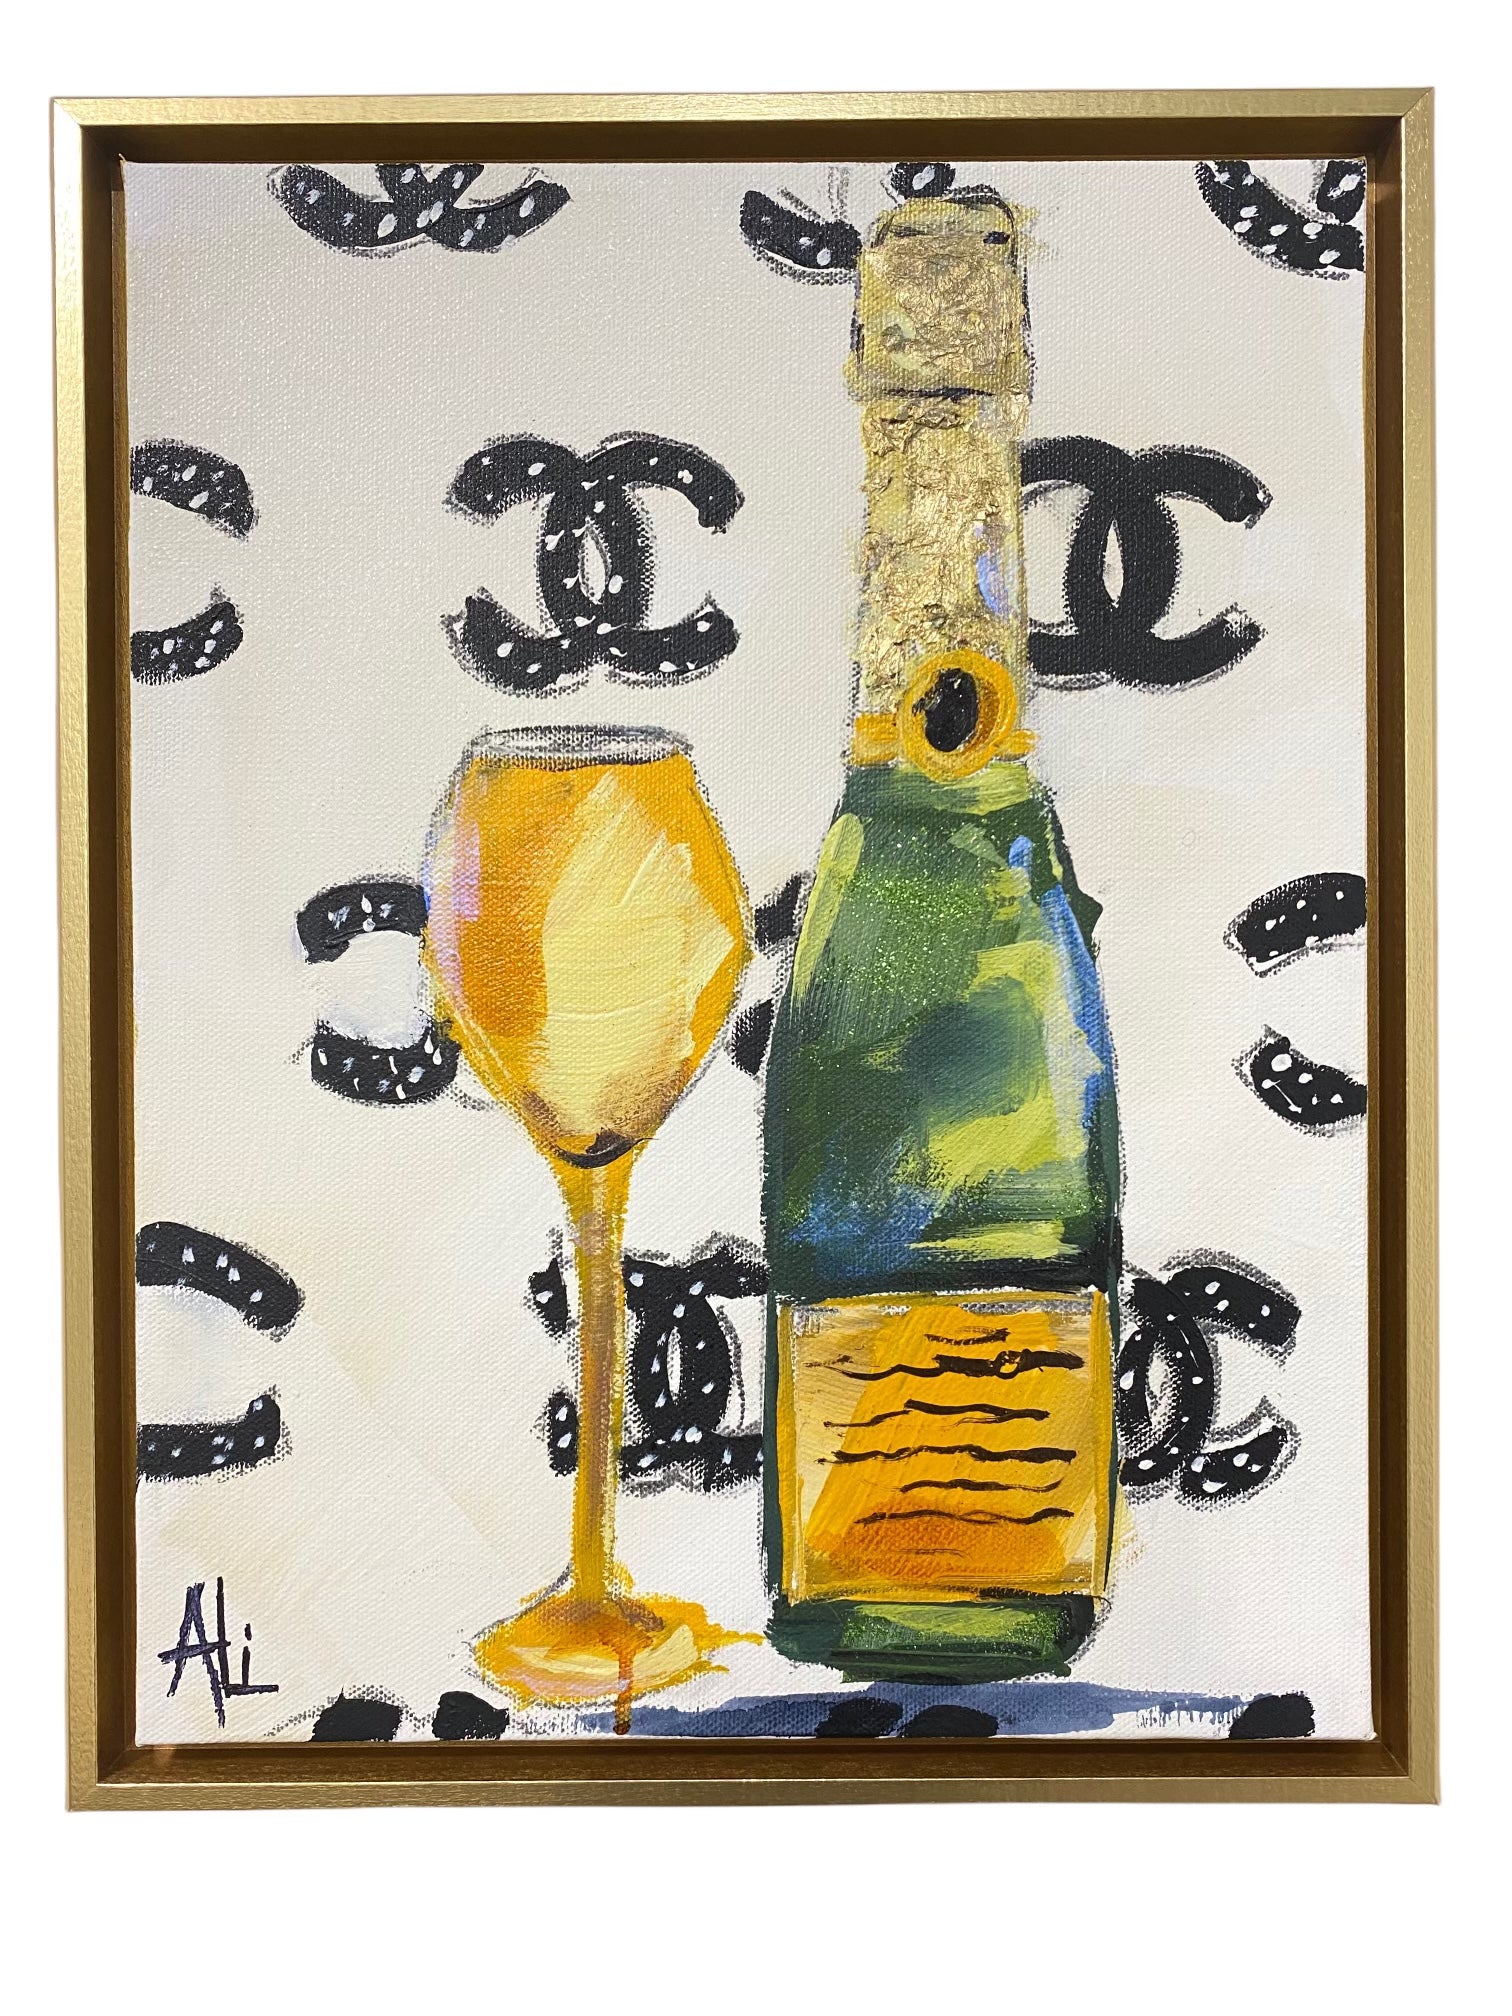 Champagne Time  Wall Art by Oliver Gal